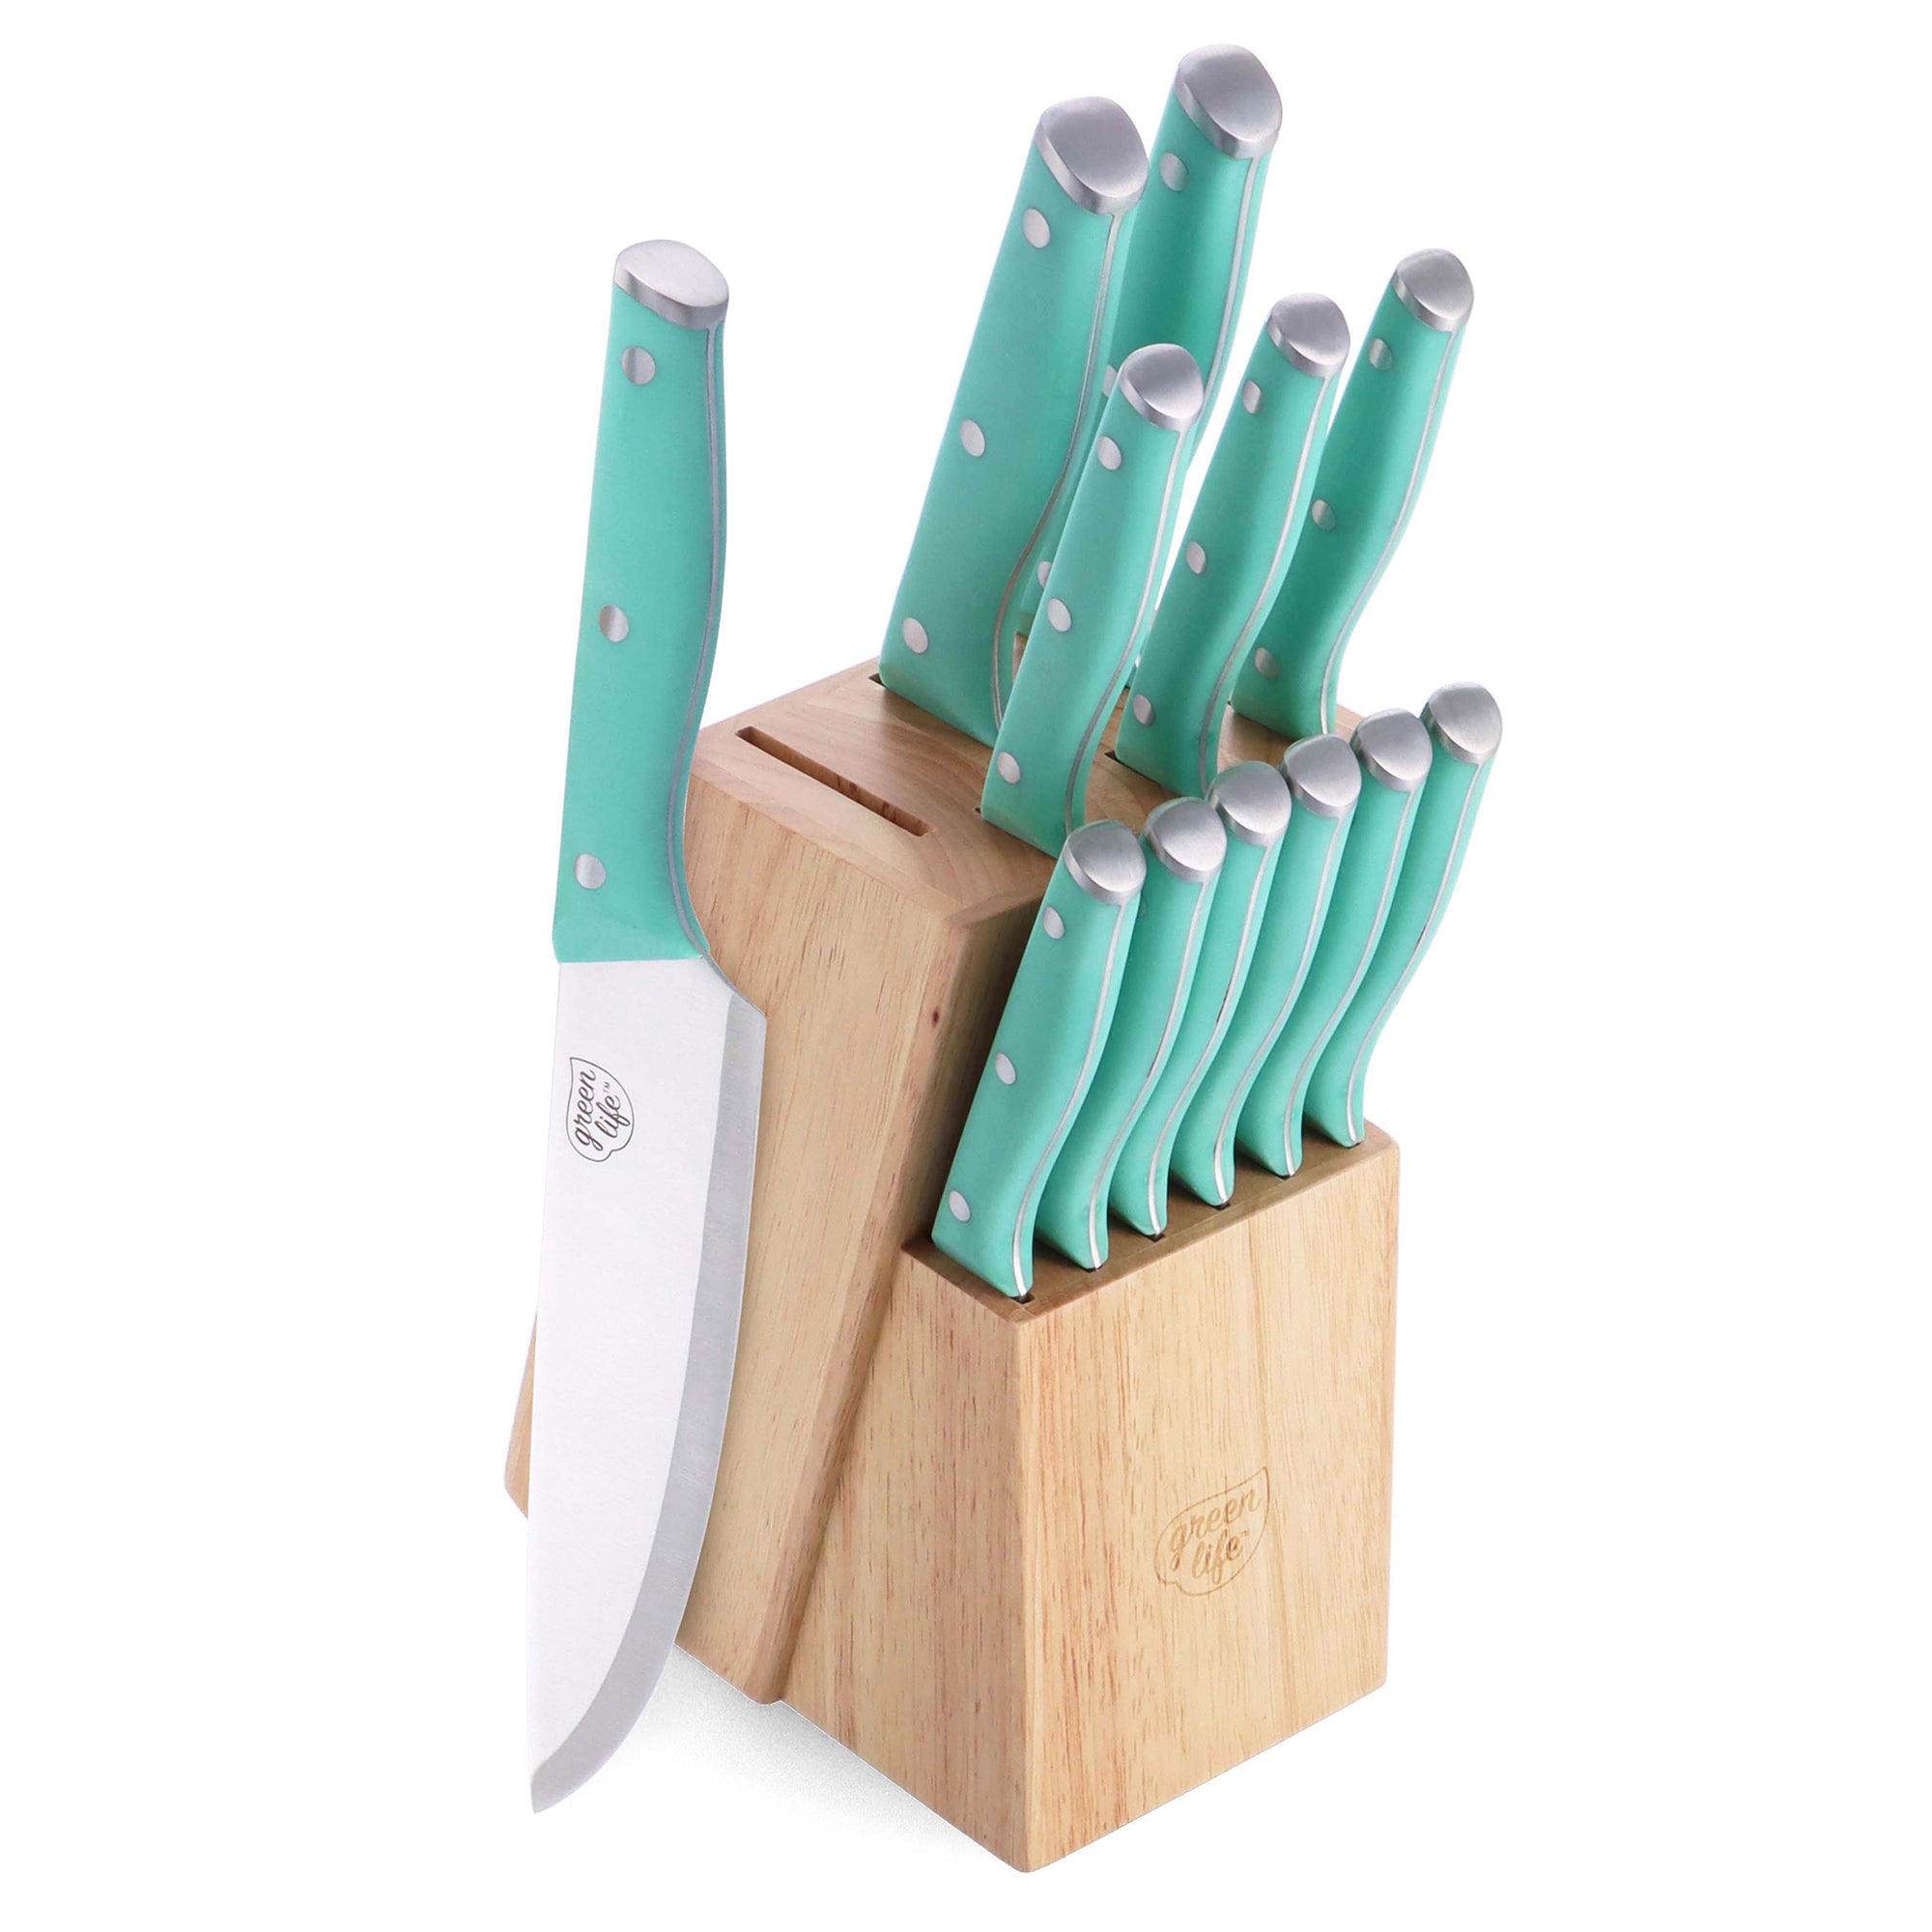 GreenLife Stainless Steel 13-Piece Knife Block Cutlery Set